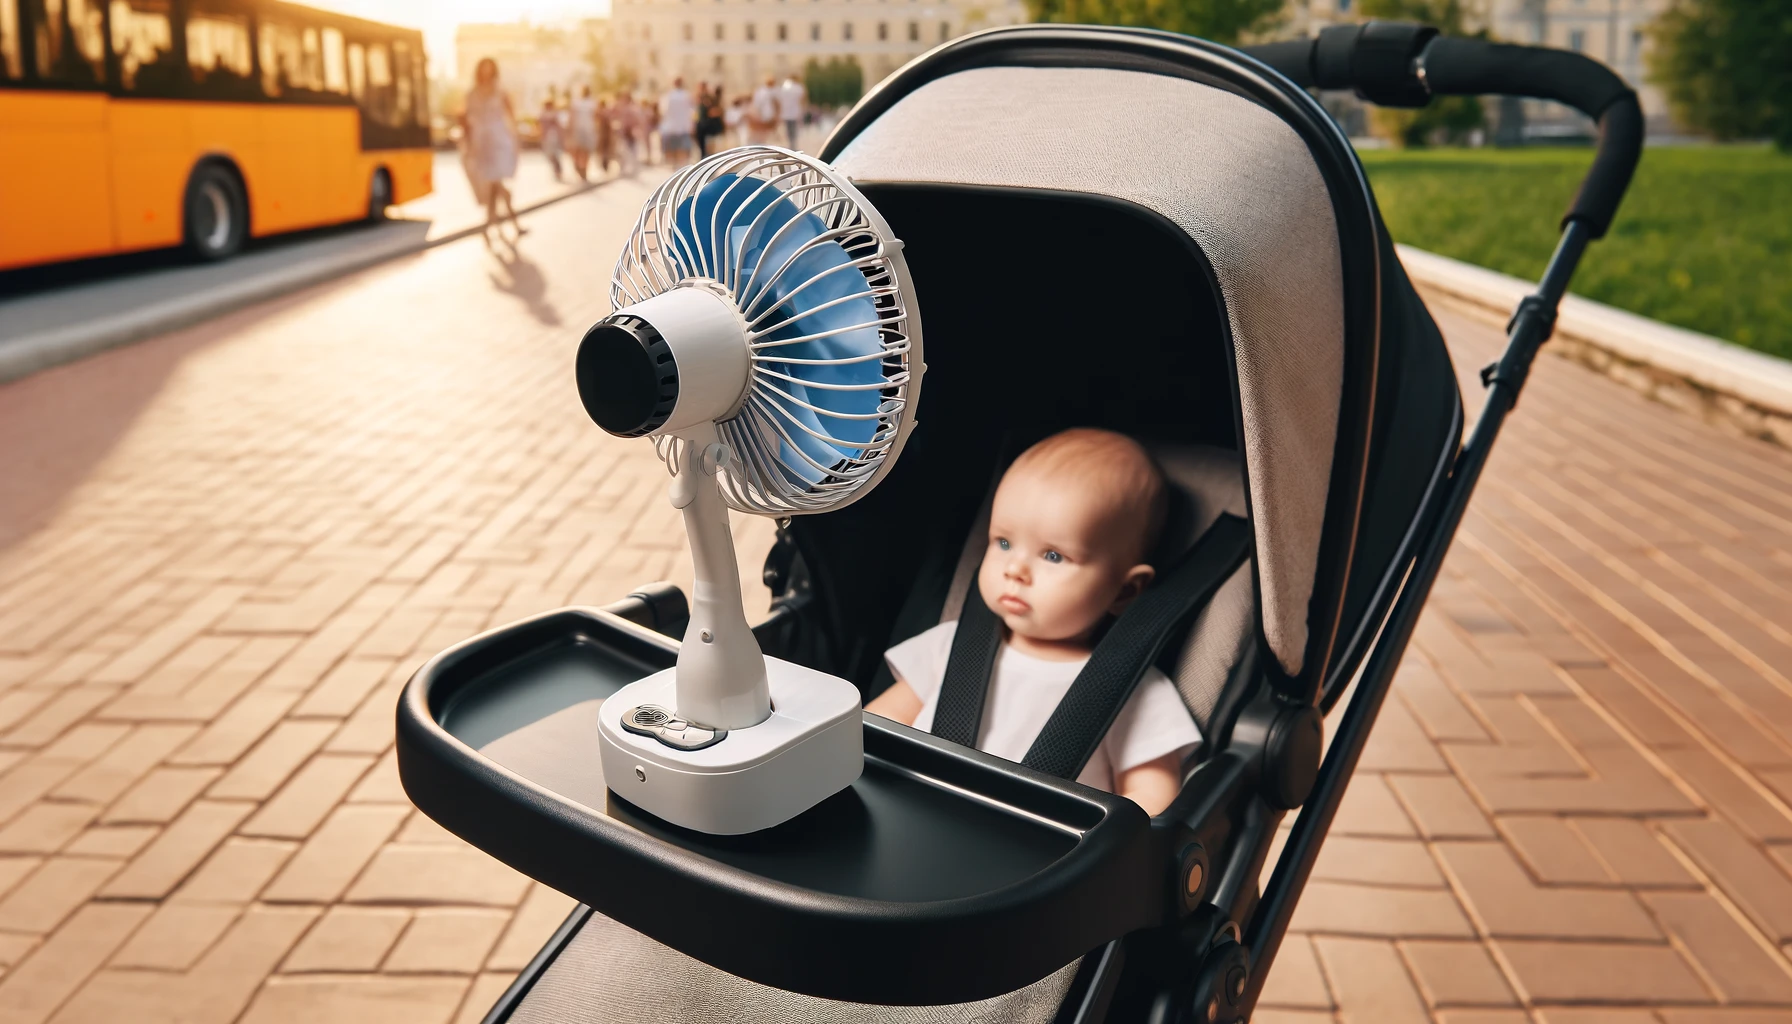 An image showcasing a small fan attached to a stroller, providing a cool breeze for the baby during warm days. The fan is compact and designed specifically for attachment to a stroller, featuring a safe, child-friendly construction. It's positioned in such a way that air circulates comfortably around the stroller's seating area, offering relief from the heat without being directly in the baby's face. The scene is set outdoors, possibly in a park or a pedestrian area, highlighting the fan's utility in real-life scenarios. The overall look of the setup is modern and practical, emphasizing convenience and comfort for both the baby and the caregiver.